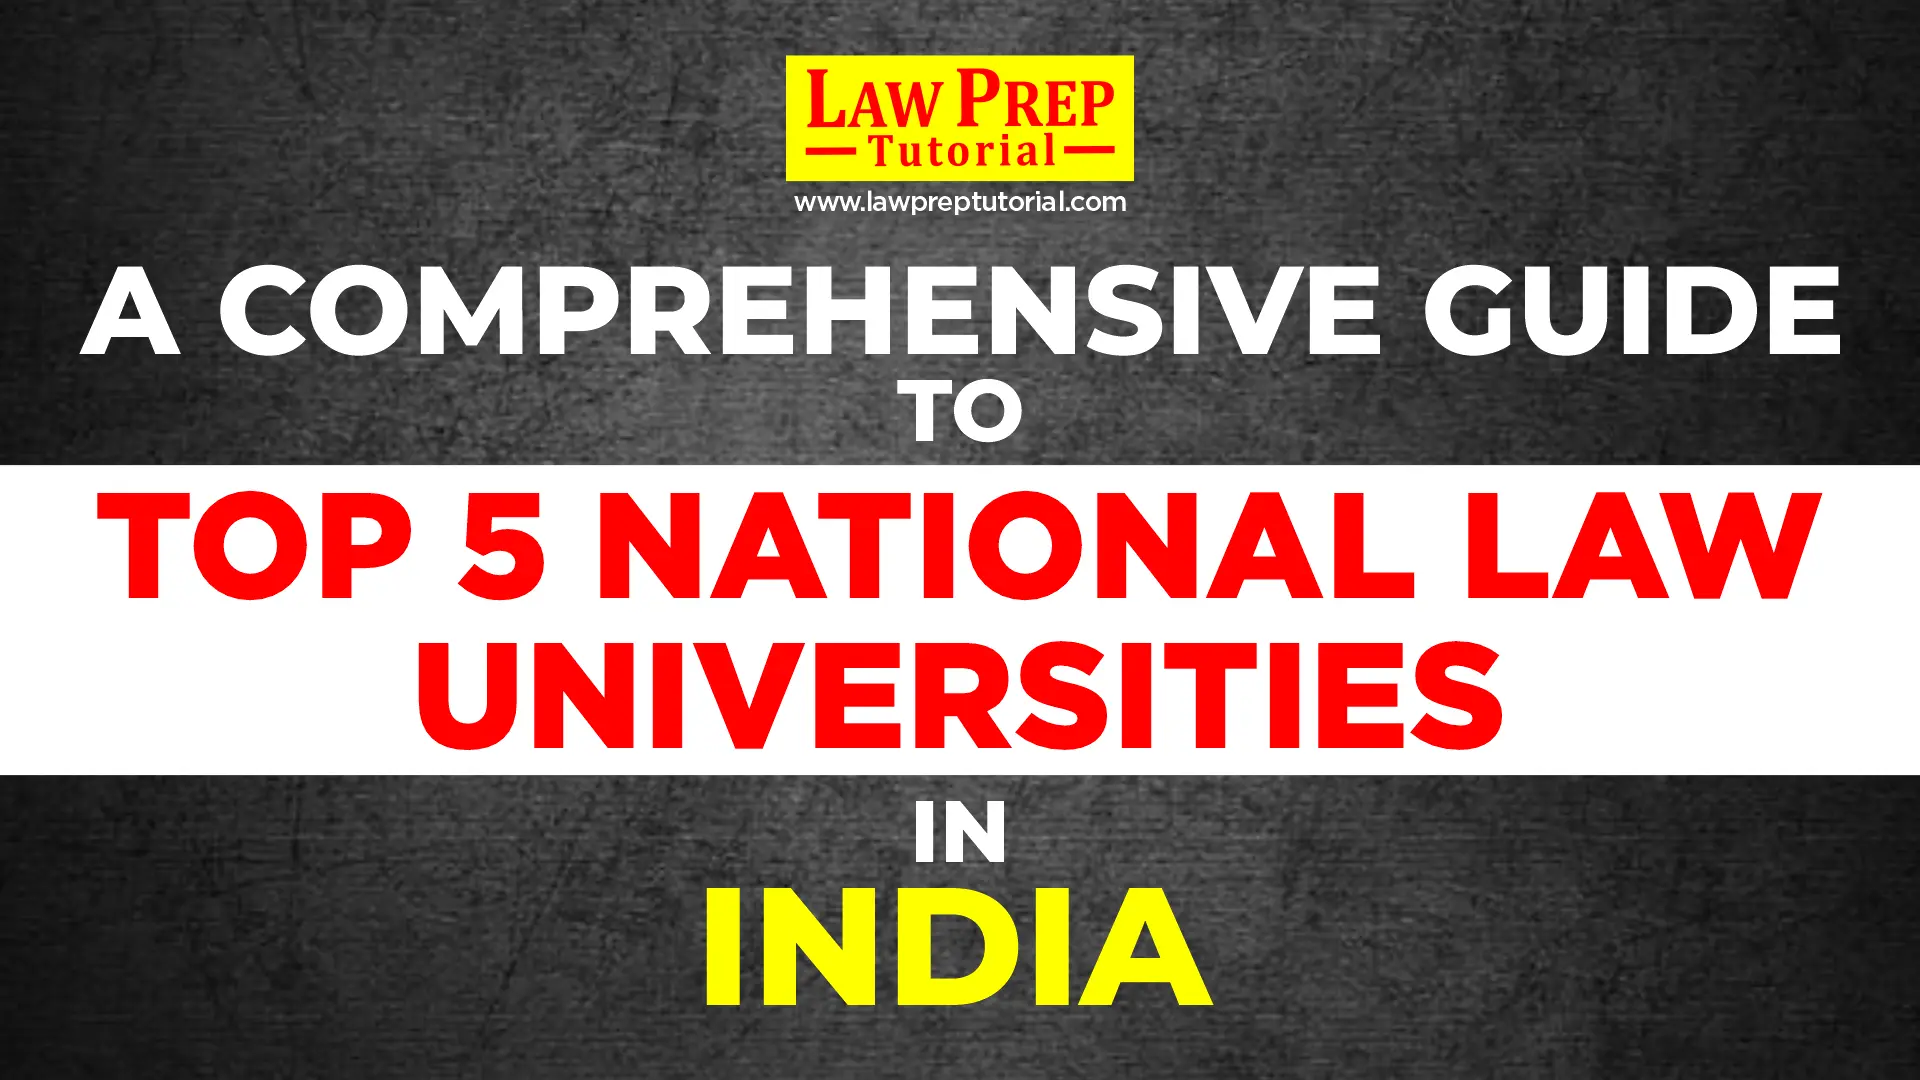 Top 5 National Law Universities in India